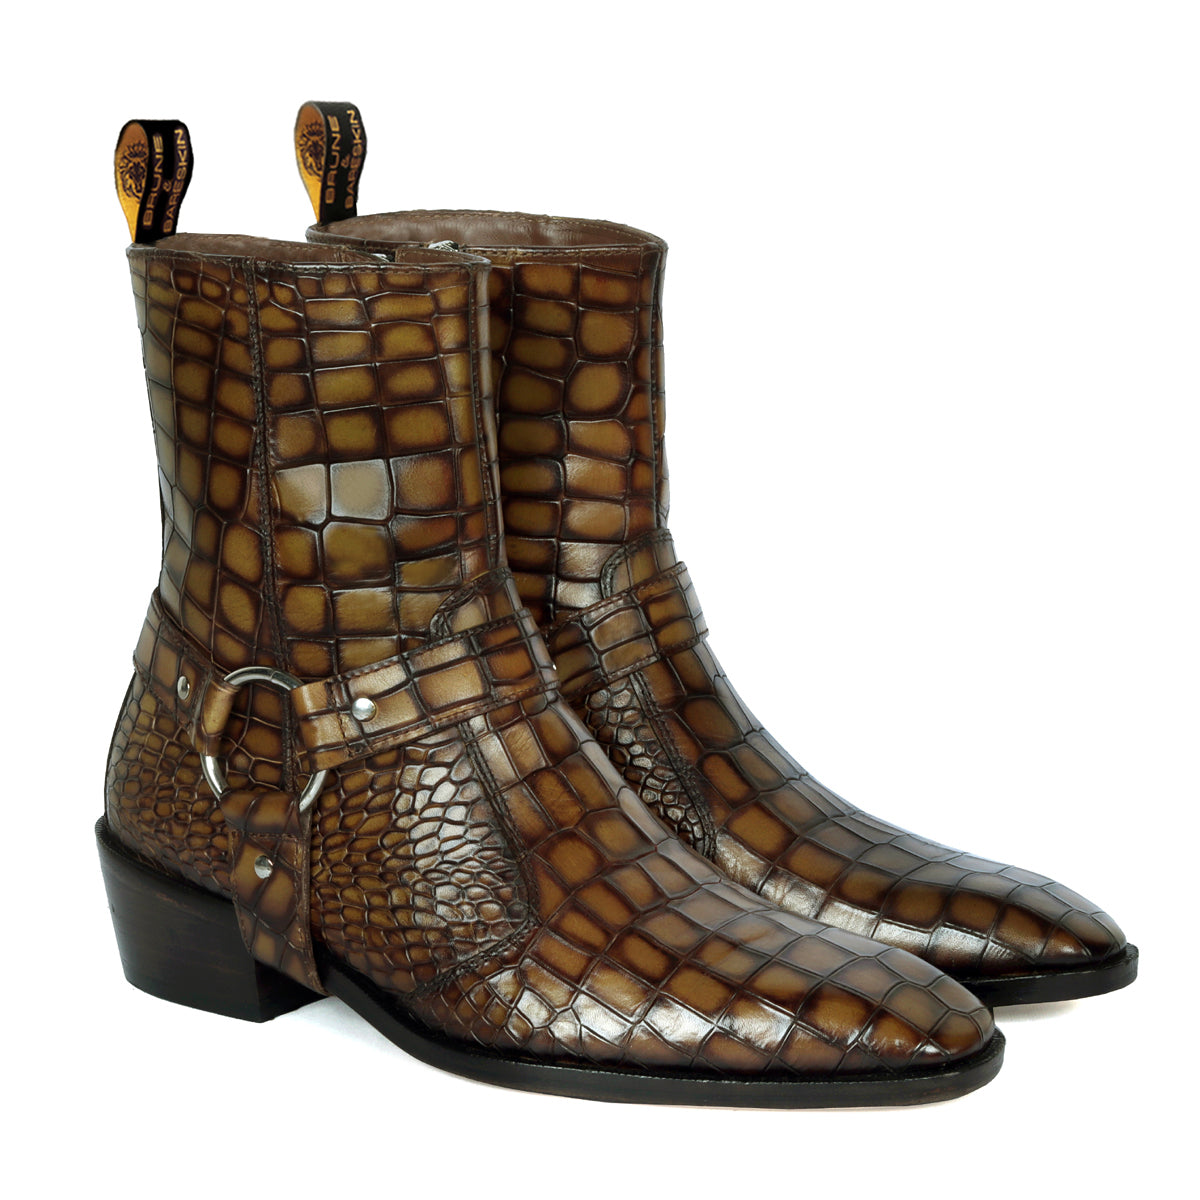 Removable/Adjustable Buckle Smokey Finish Perfect Olive Cuban Heel Croco Textured Leather Boots